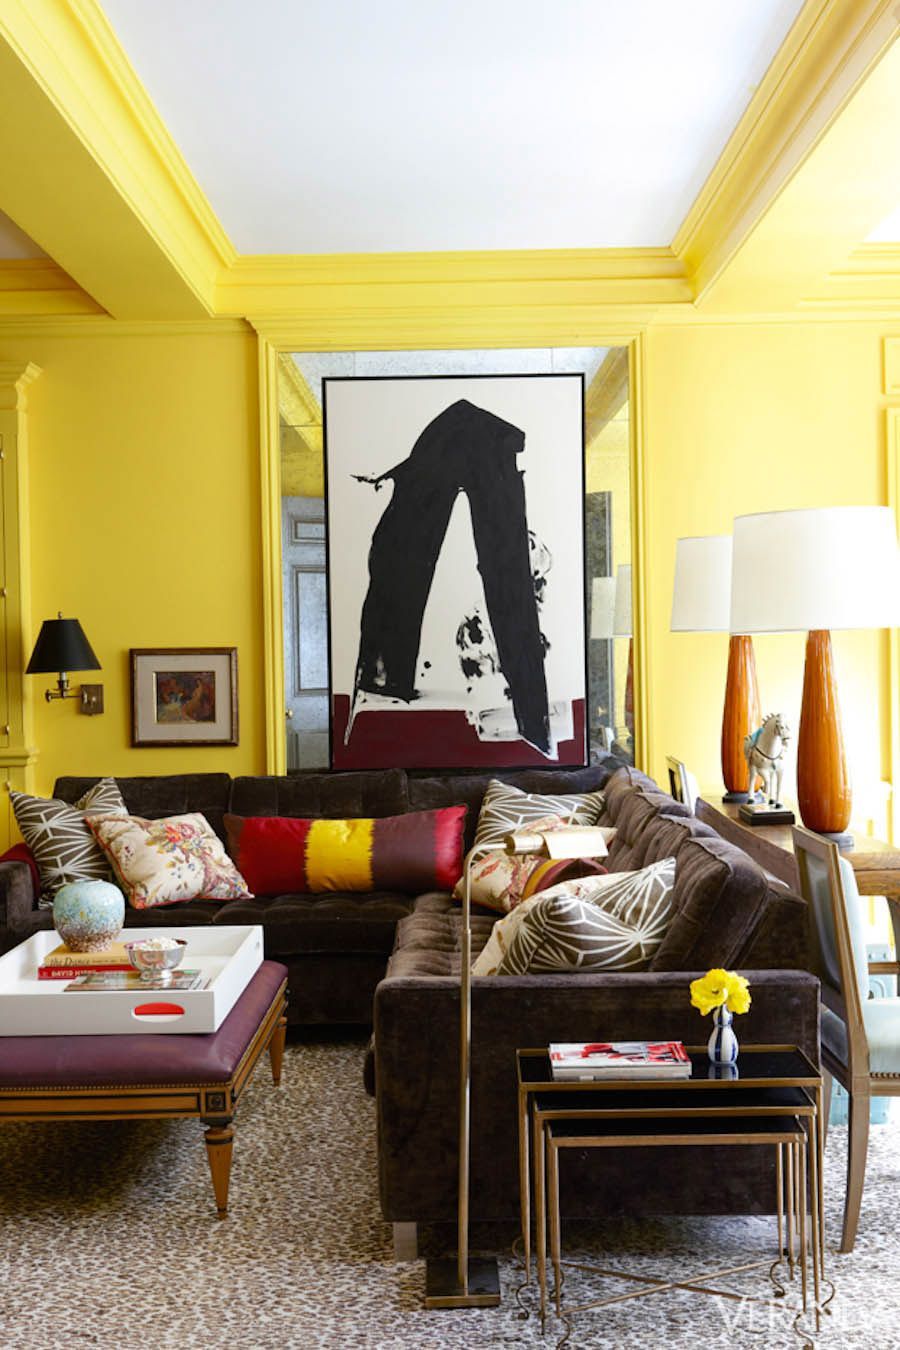 Create Yellow in a Maximalist Concept